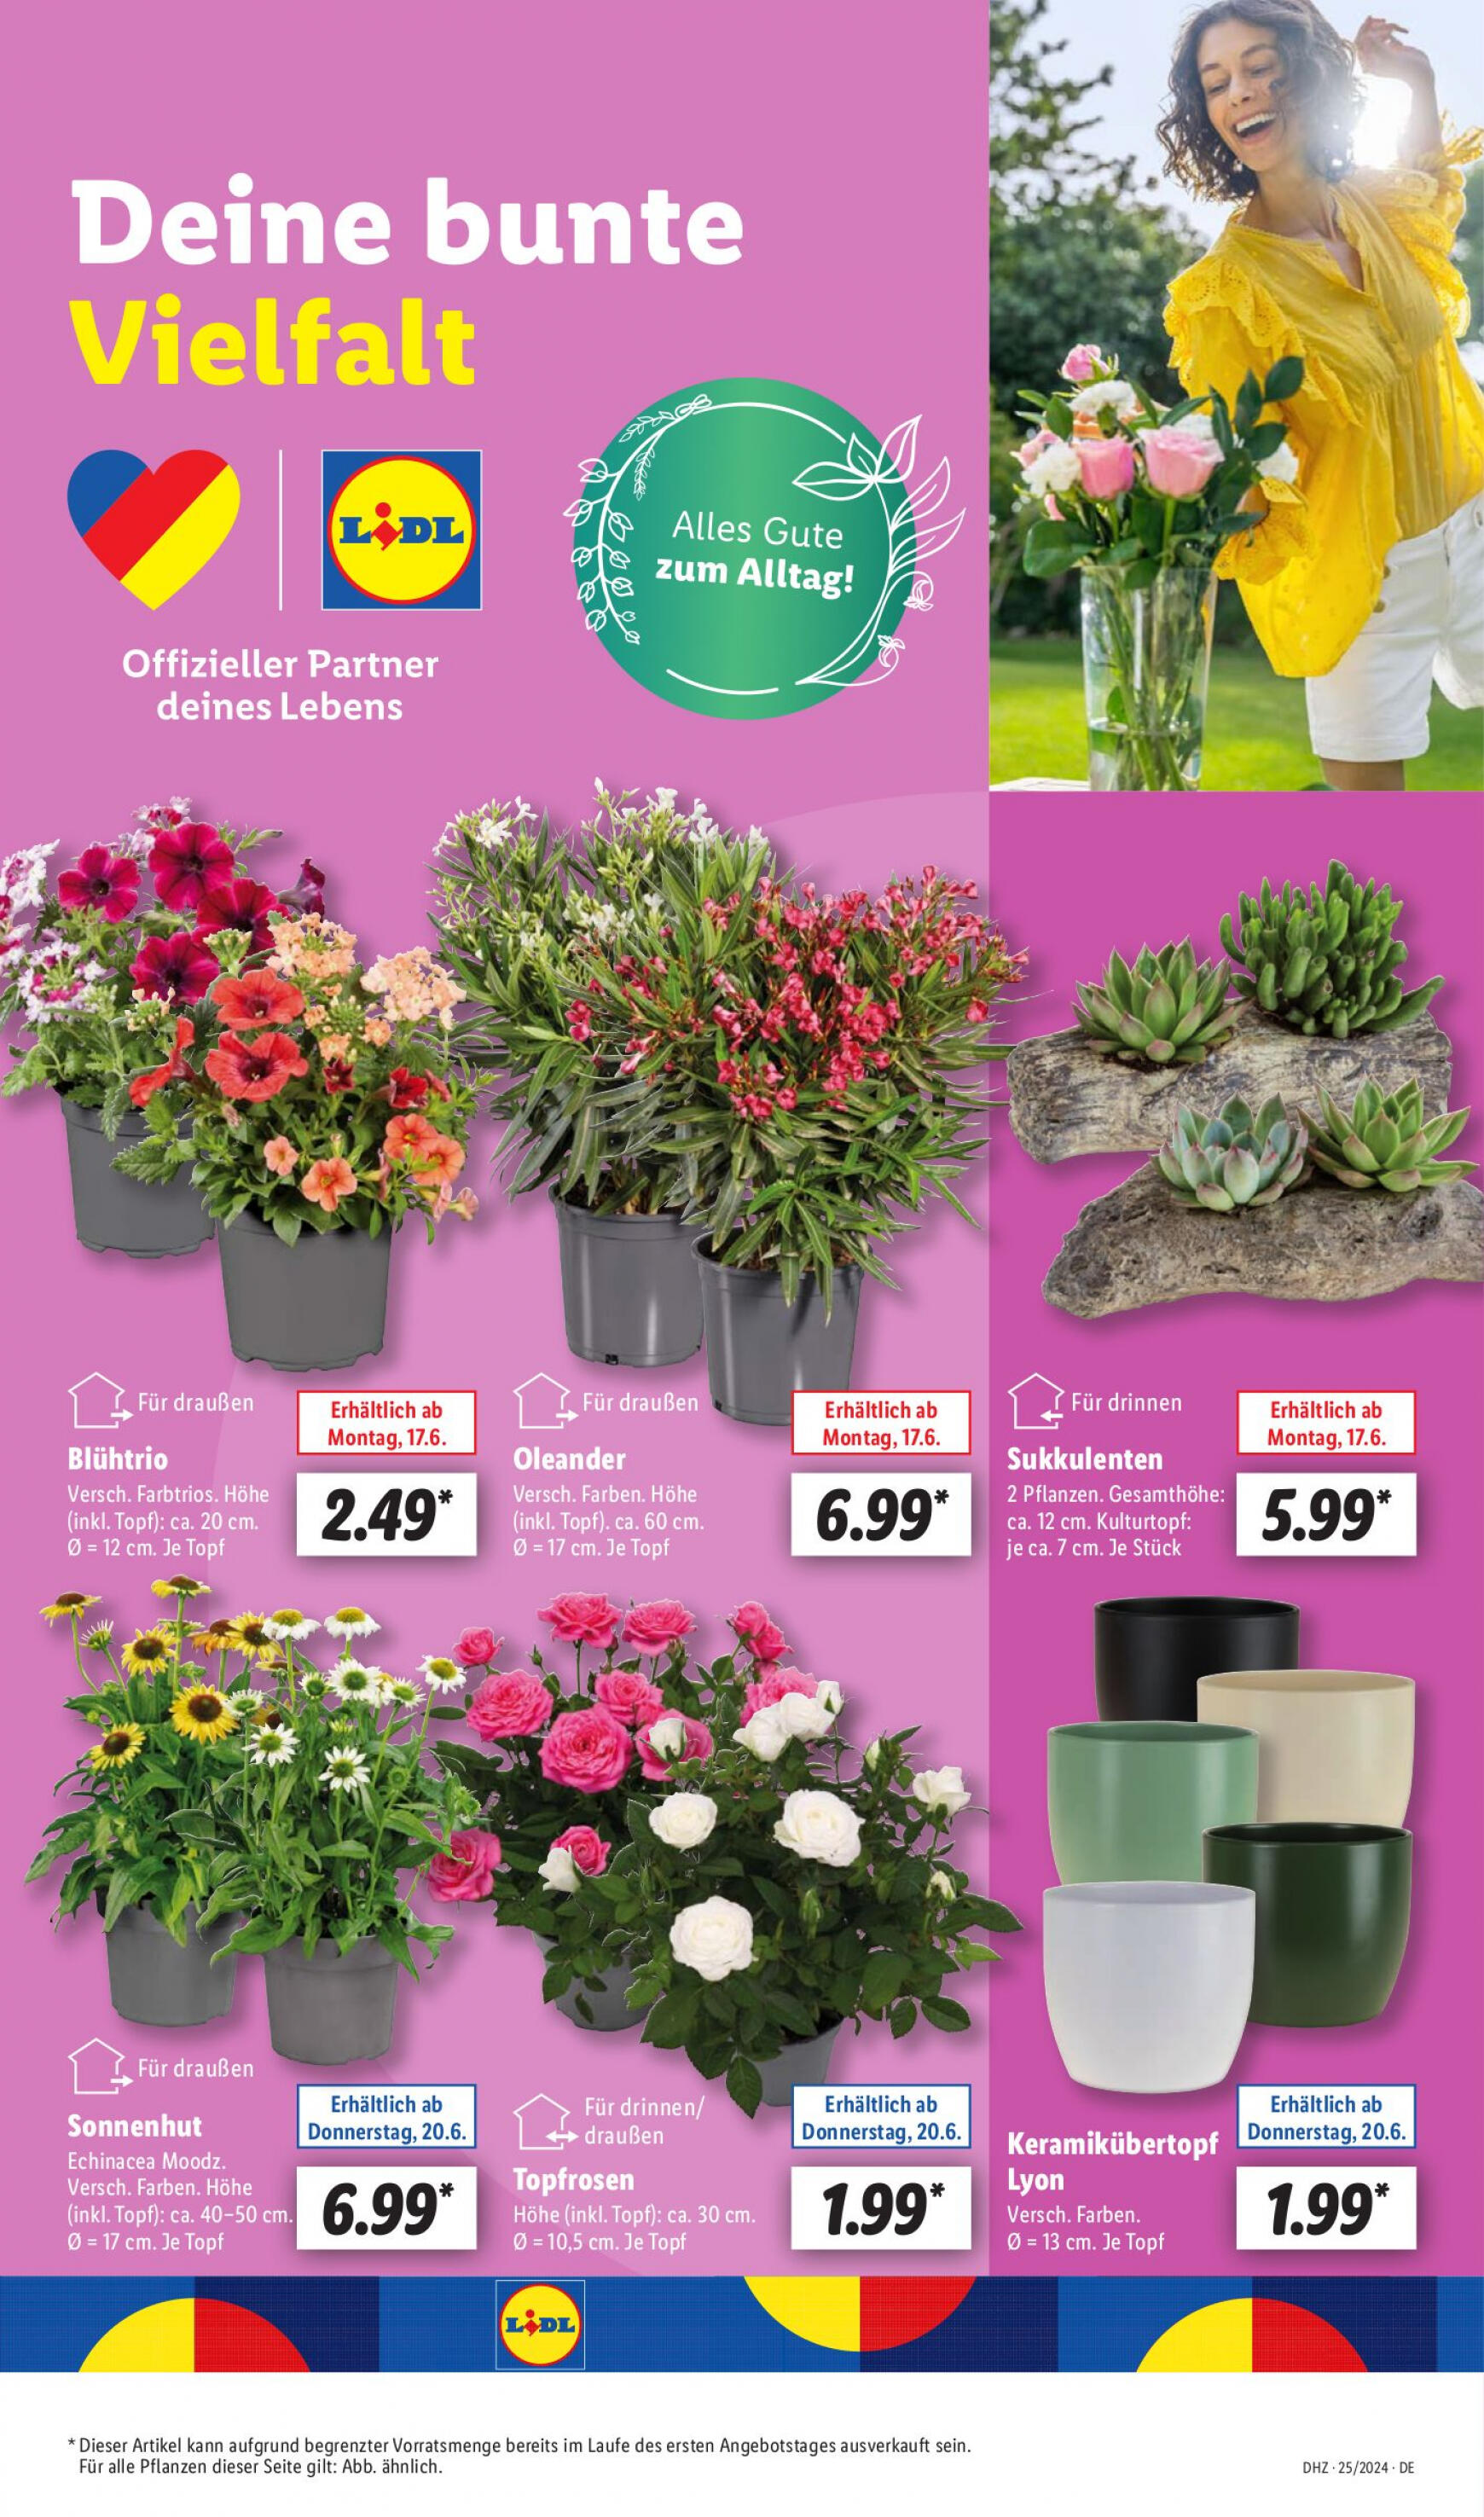 lidl - Flyer Lidl aktuell 17.06. - 22.06. - page: 5